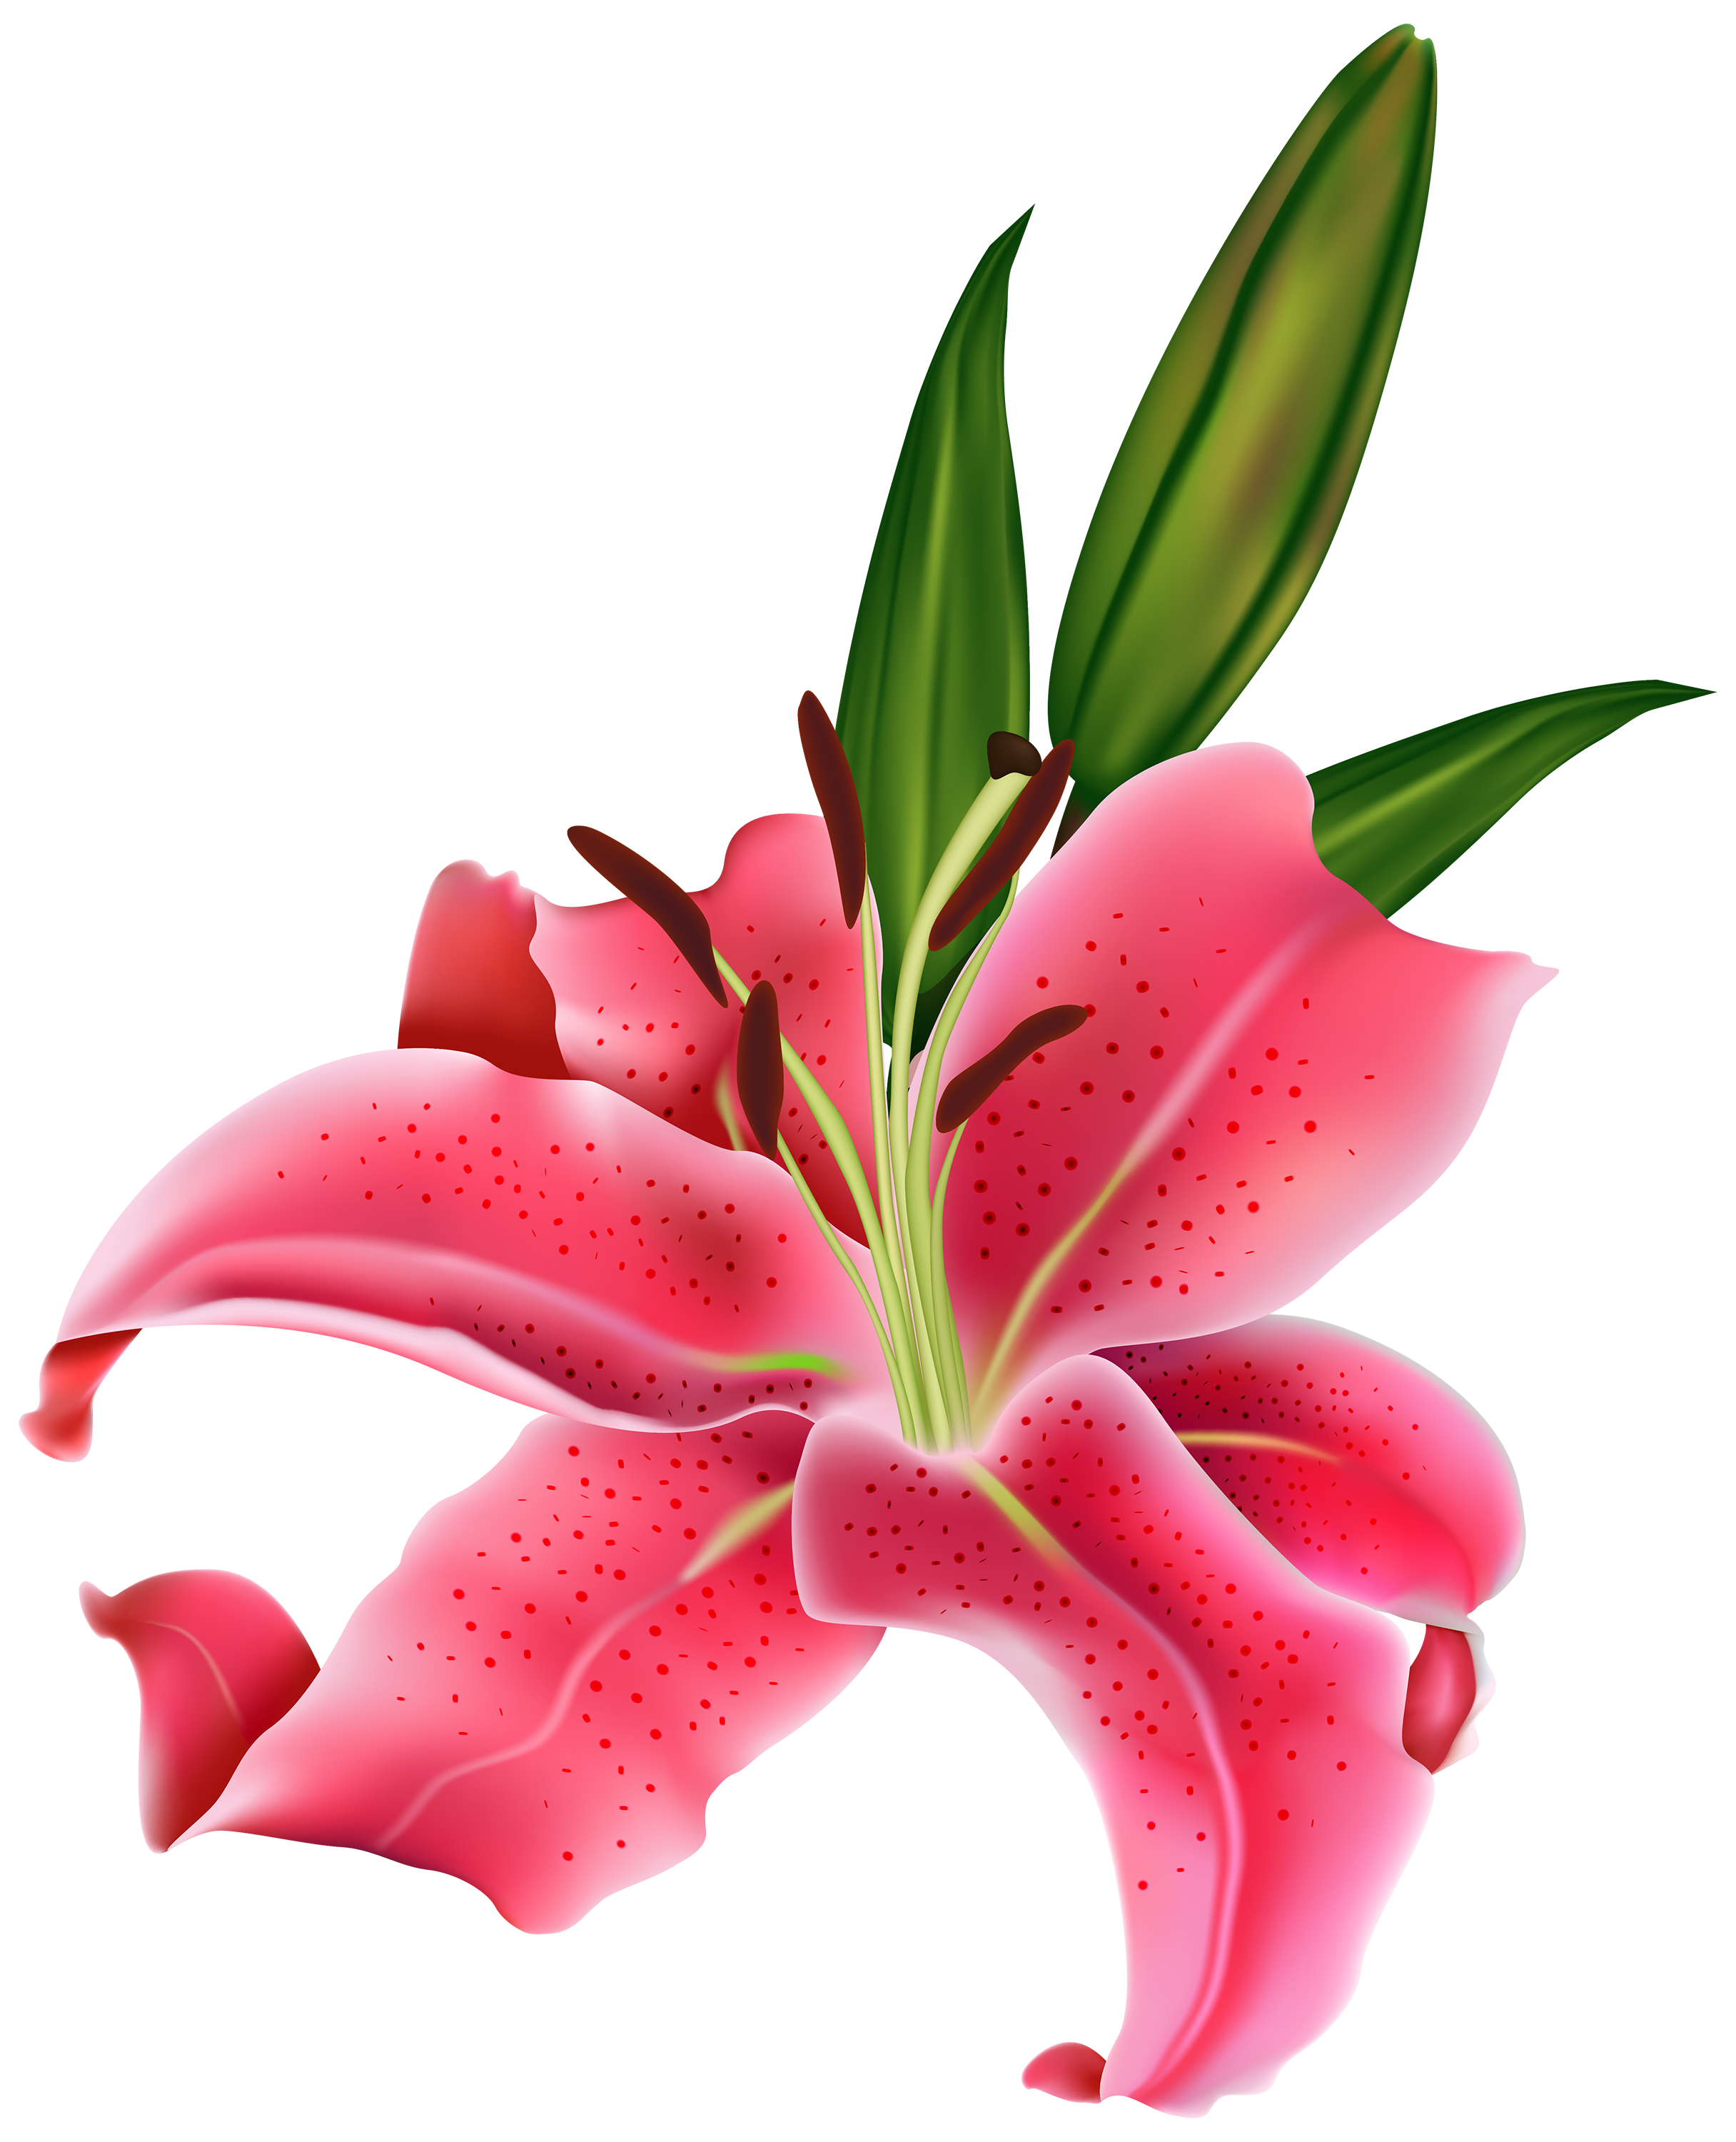 Lily flower png. Clipart at getdrawings com